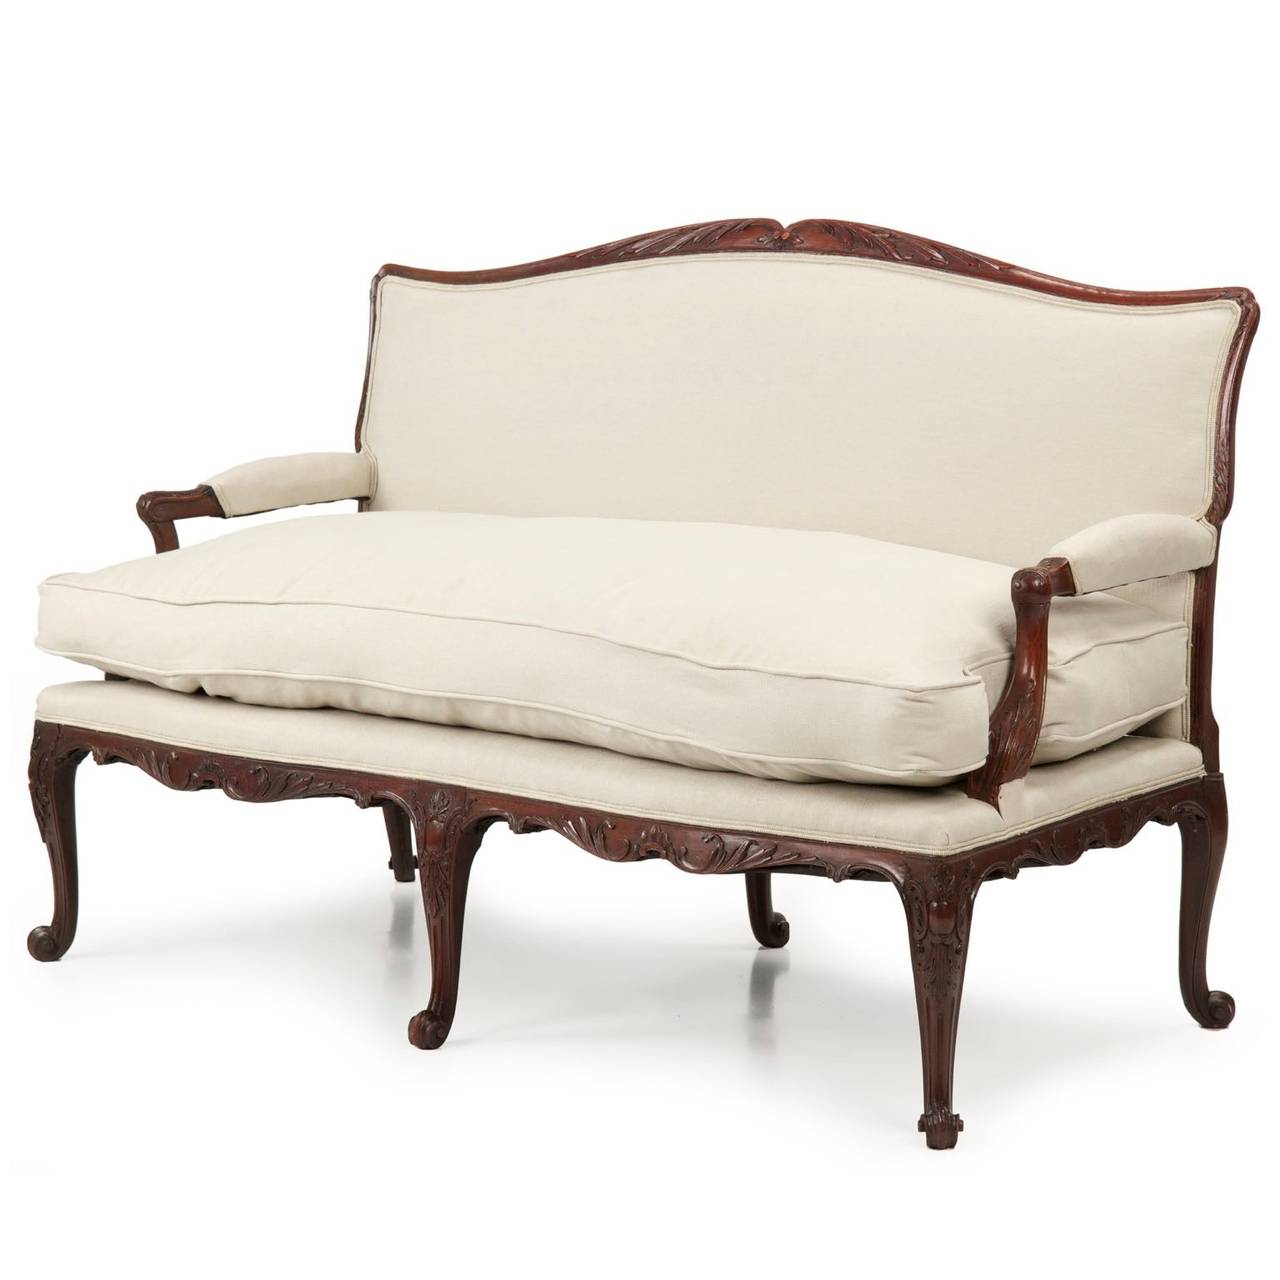 The clarity and crispness of carving throughout the mahogany surfaces of this fine settee are simply magnificent.  Sharp acanthus with their highly individual and fluid leaves furl freely along every open surface, the knees embellished with an